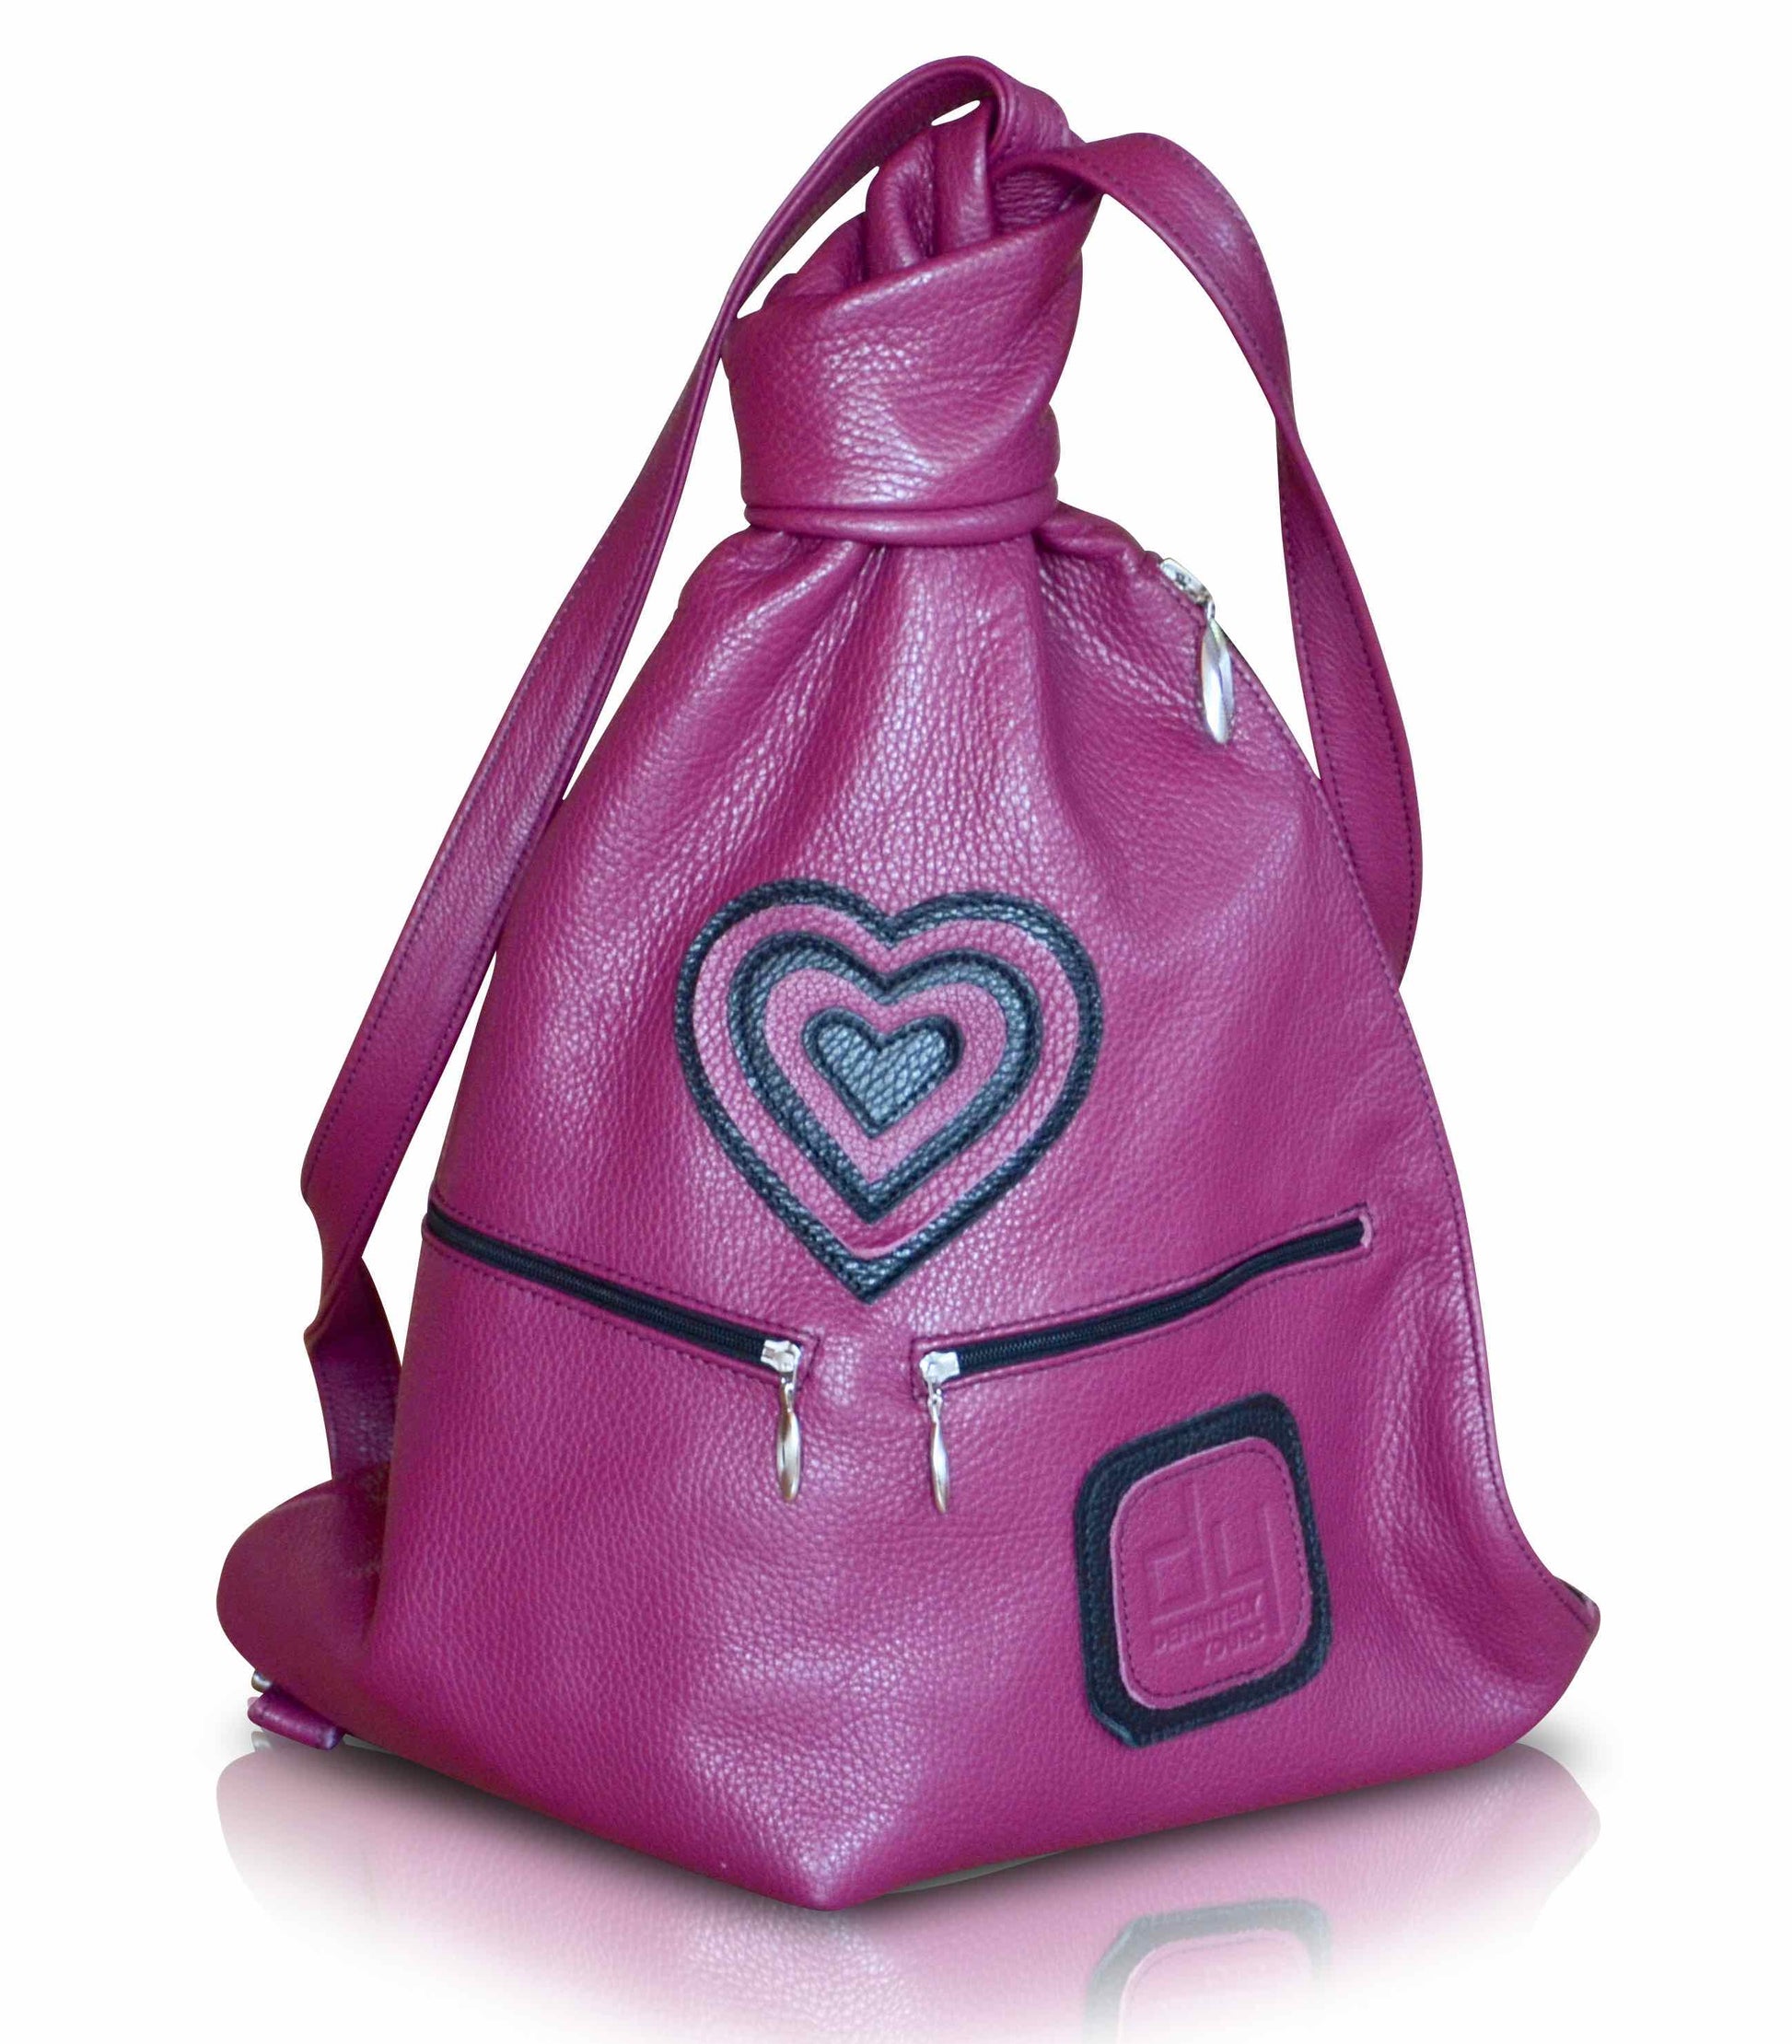 Dark pink leather backpack with heart